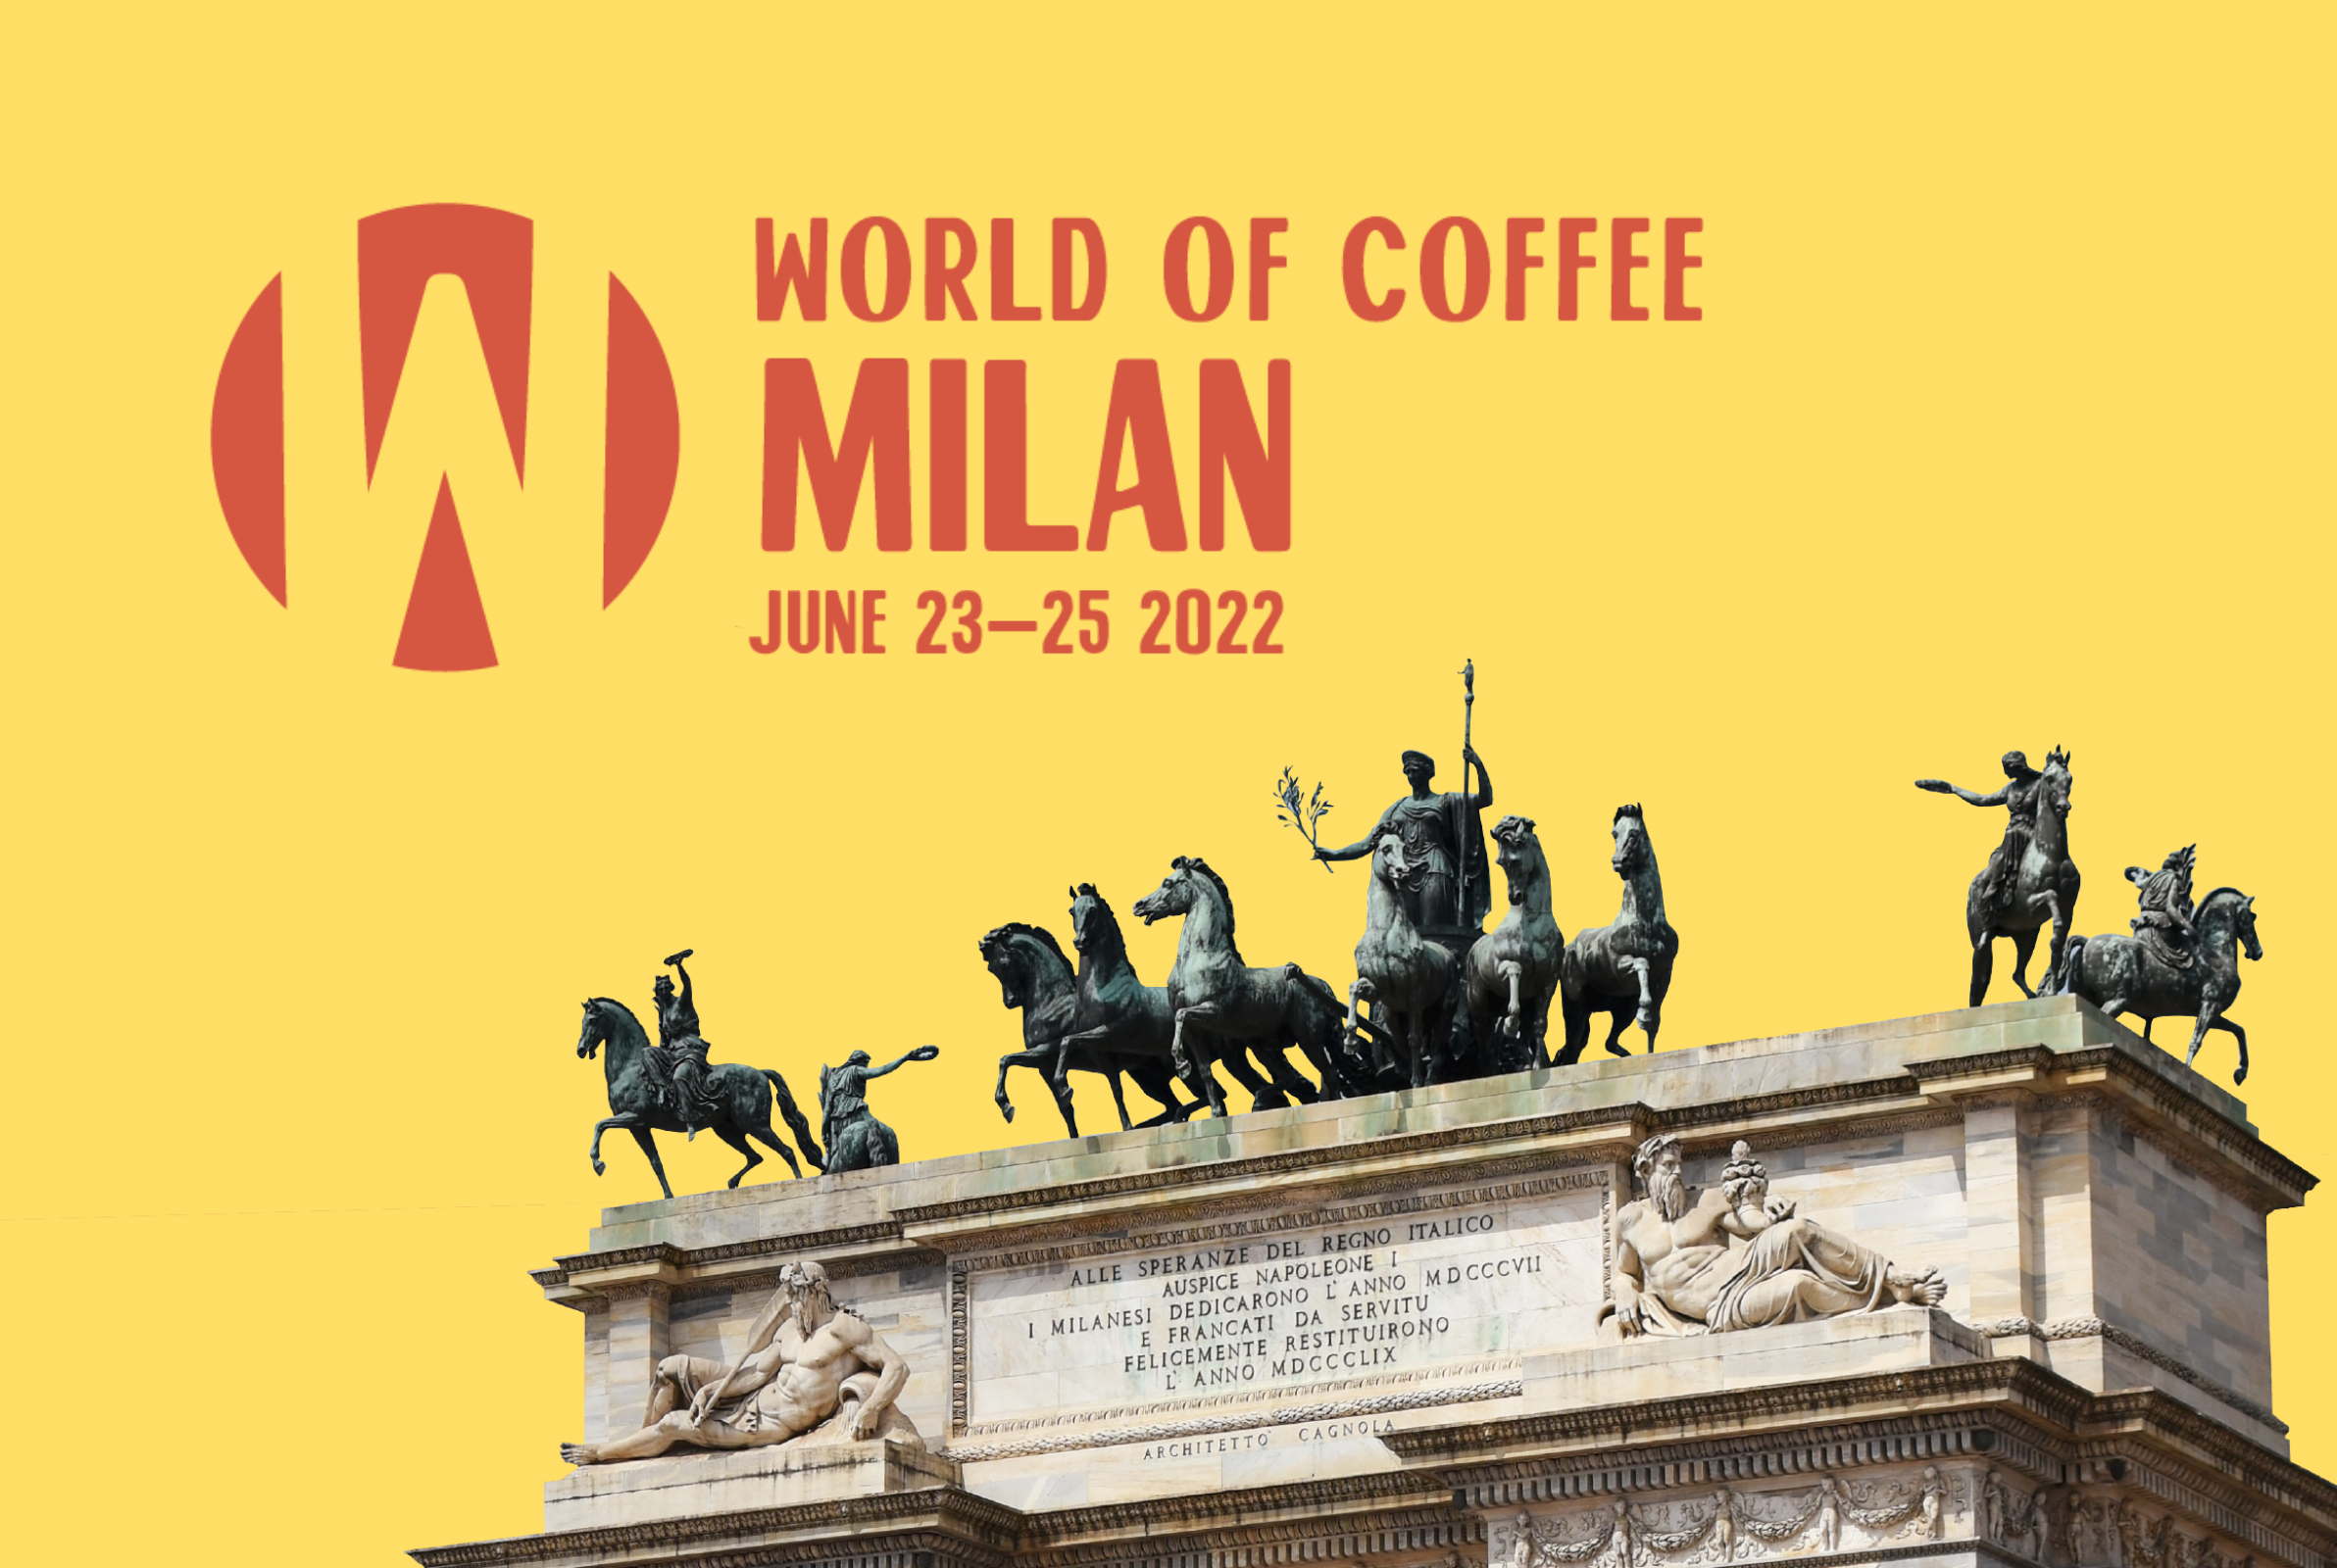 SAVE THE DATE! REPA AT WORLD OF COFFEE 2022